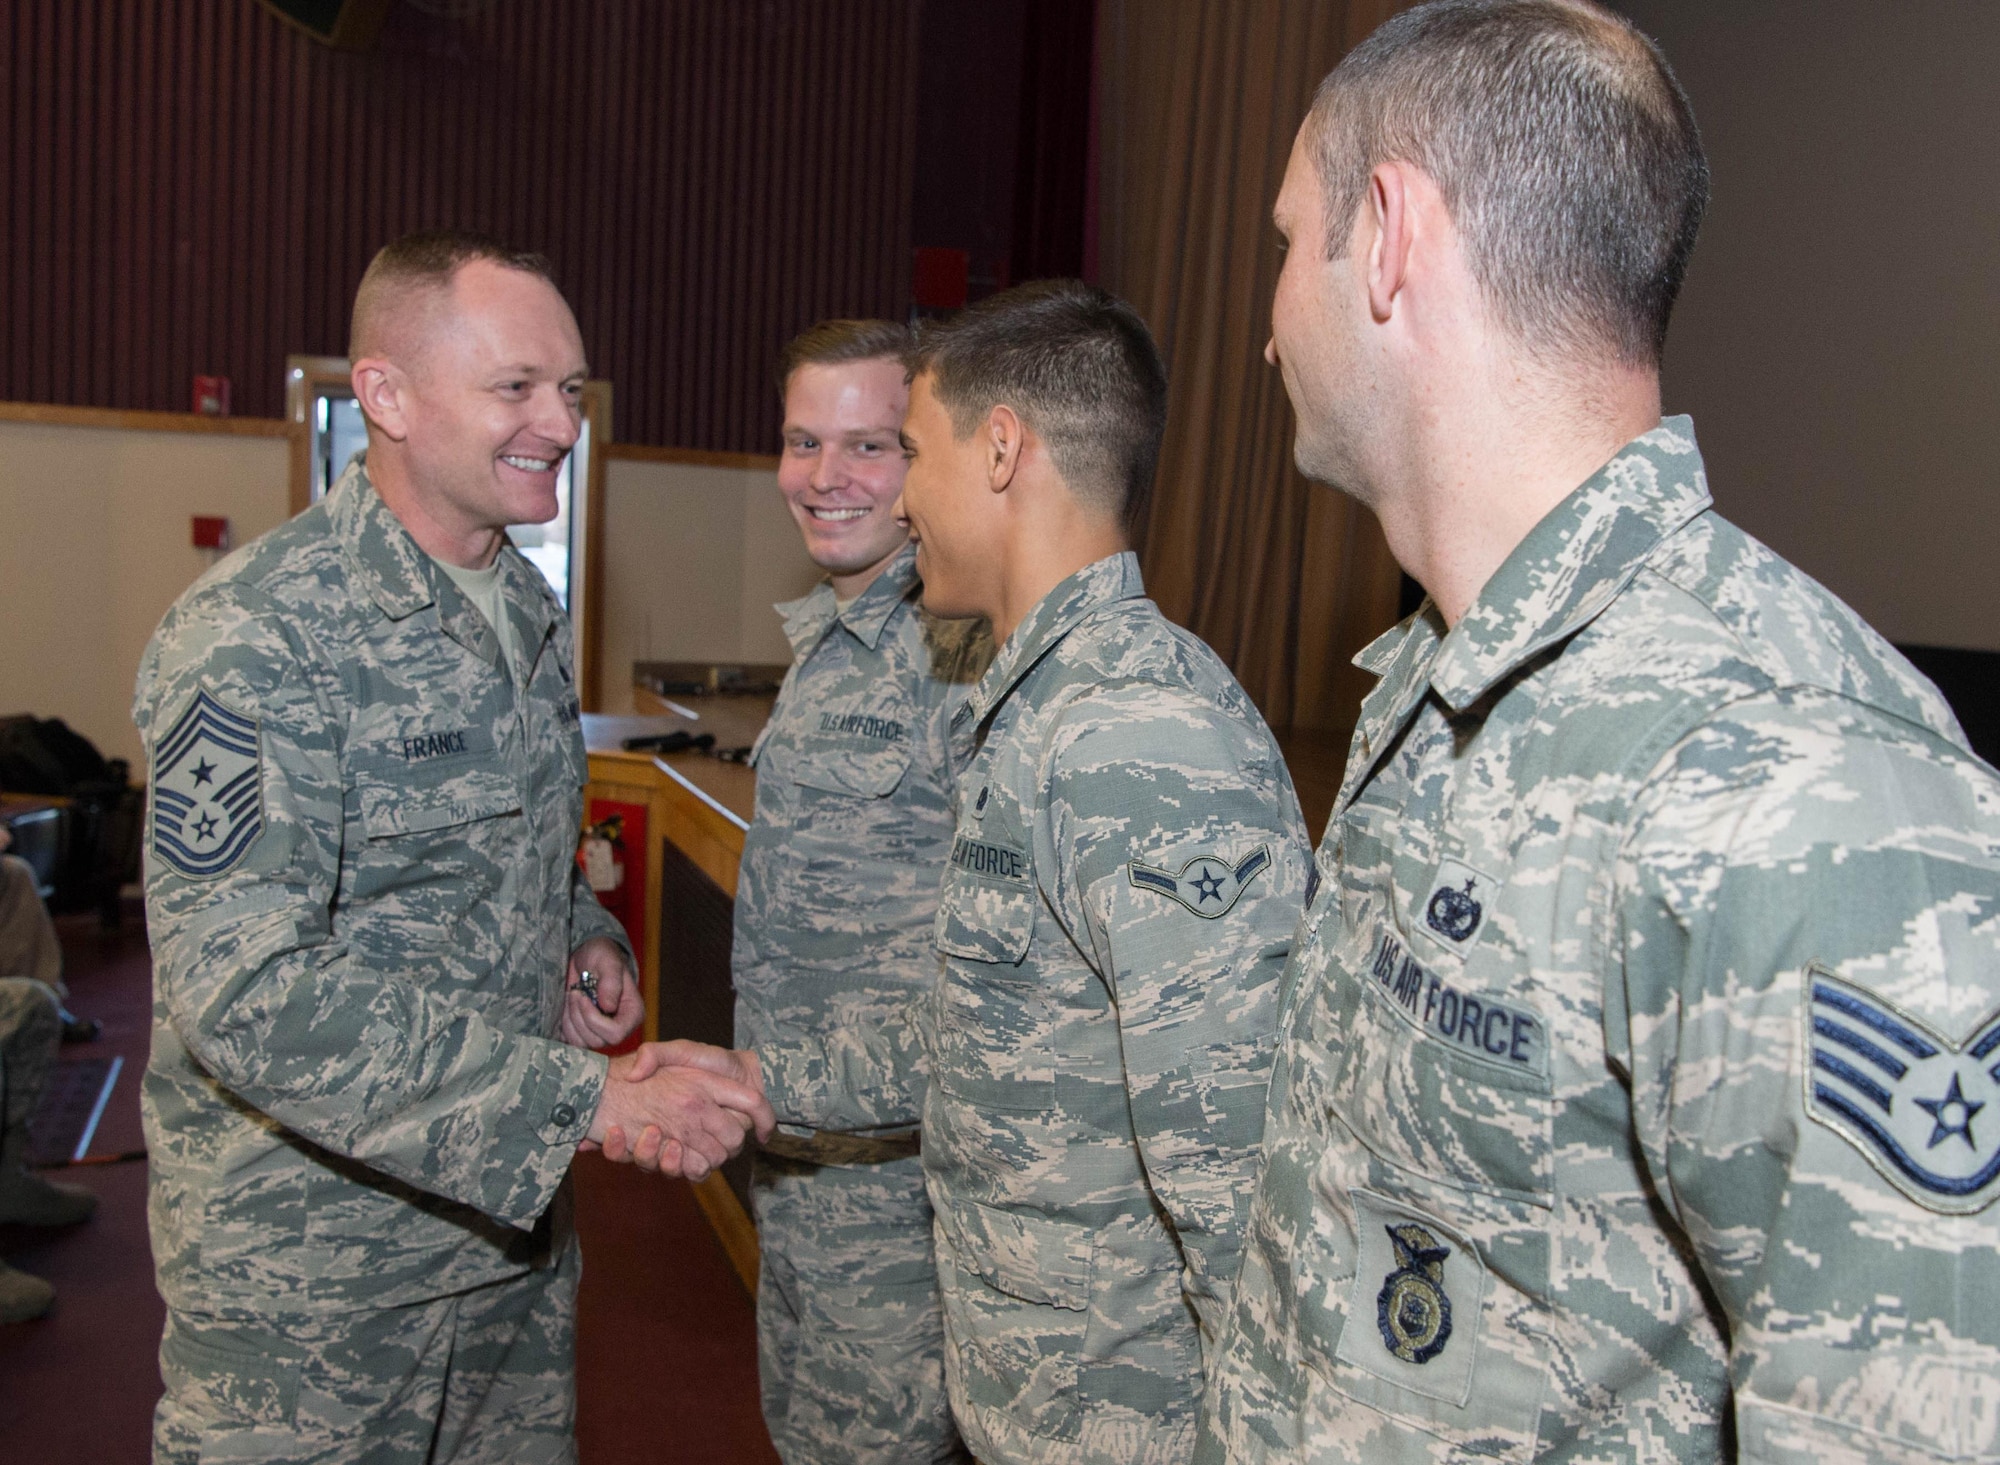 Chief Master Sgt. Jason France, Air Force Materiel Command's command chief, presents a coin to Airman Stephen C. Gary, II, during an enlisted call at the base theater Dec. 1, while Staff Sgt. Richard C. Grathen, right, and Airman 1st Class Steven J. Peplinski, each of whom also received coins, look on. During the enlisted call, France shared his thoughts on a number of topics that affect the command’s enlisted personnel. (U.S. Air Force photo by Jerry Saslav)